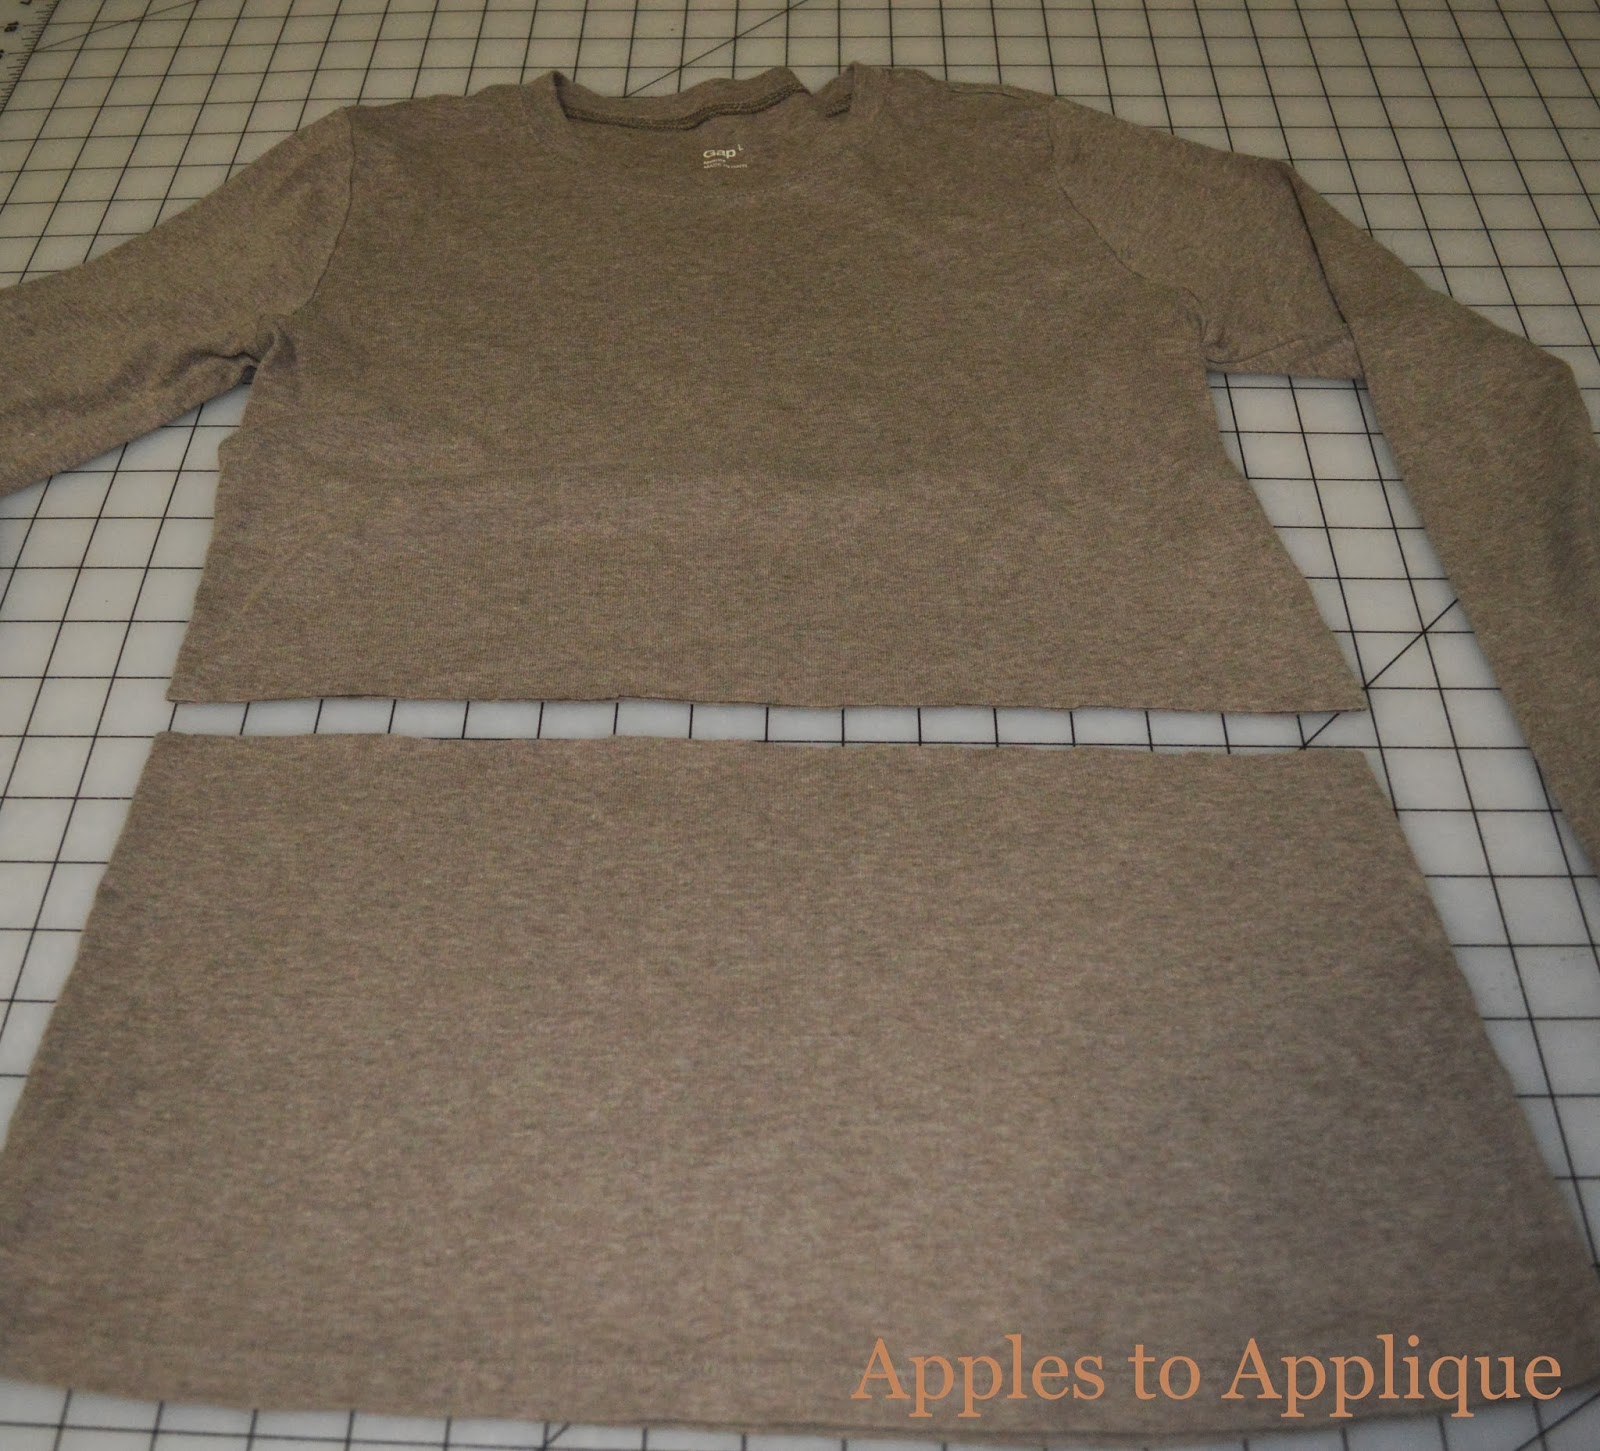 Apples to Applique: Lengthening a T-Shirt